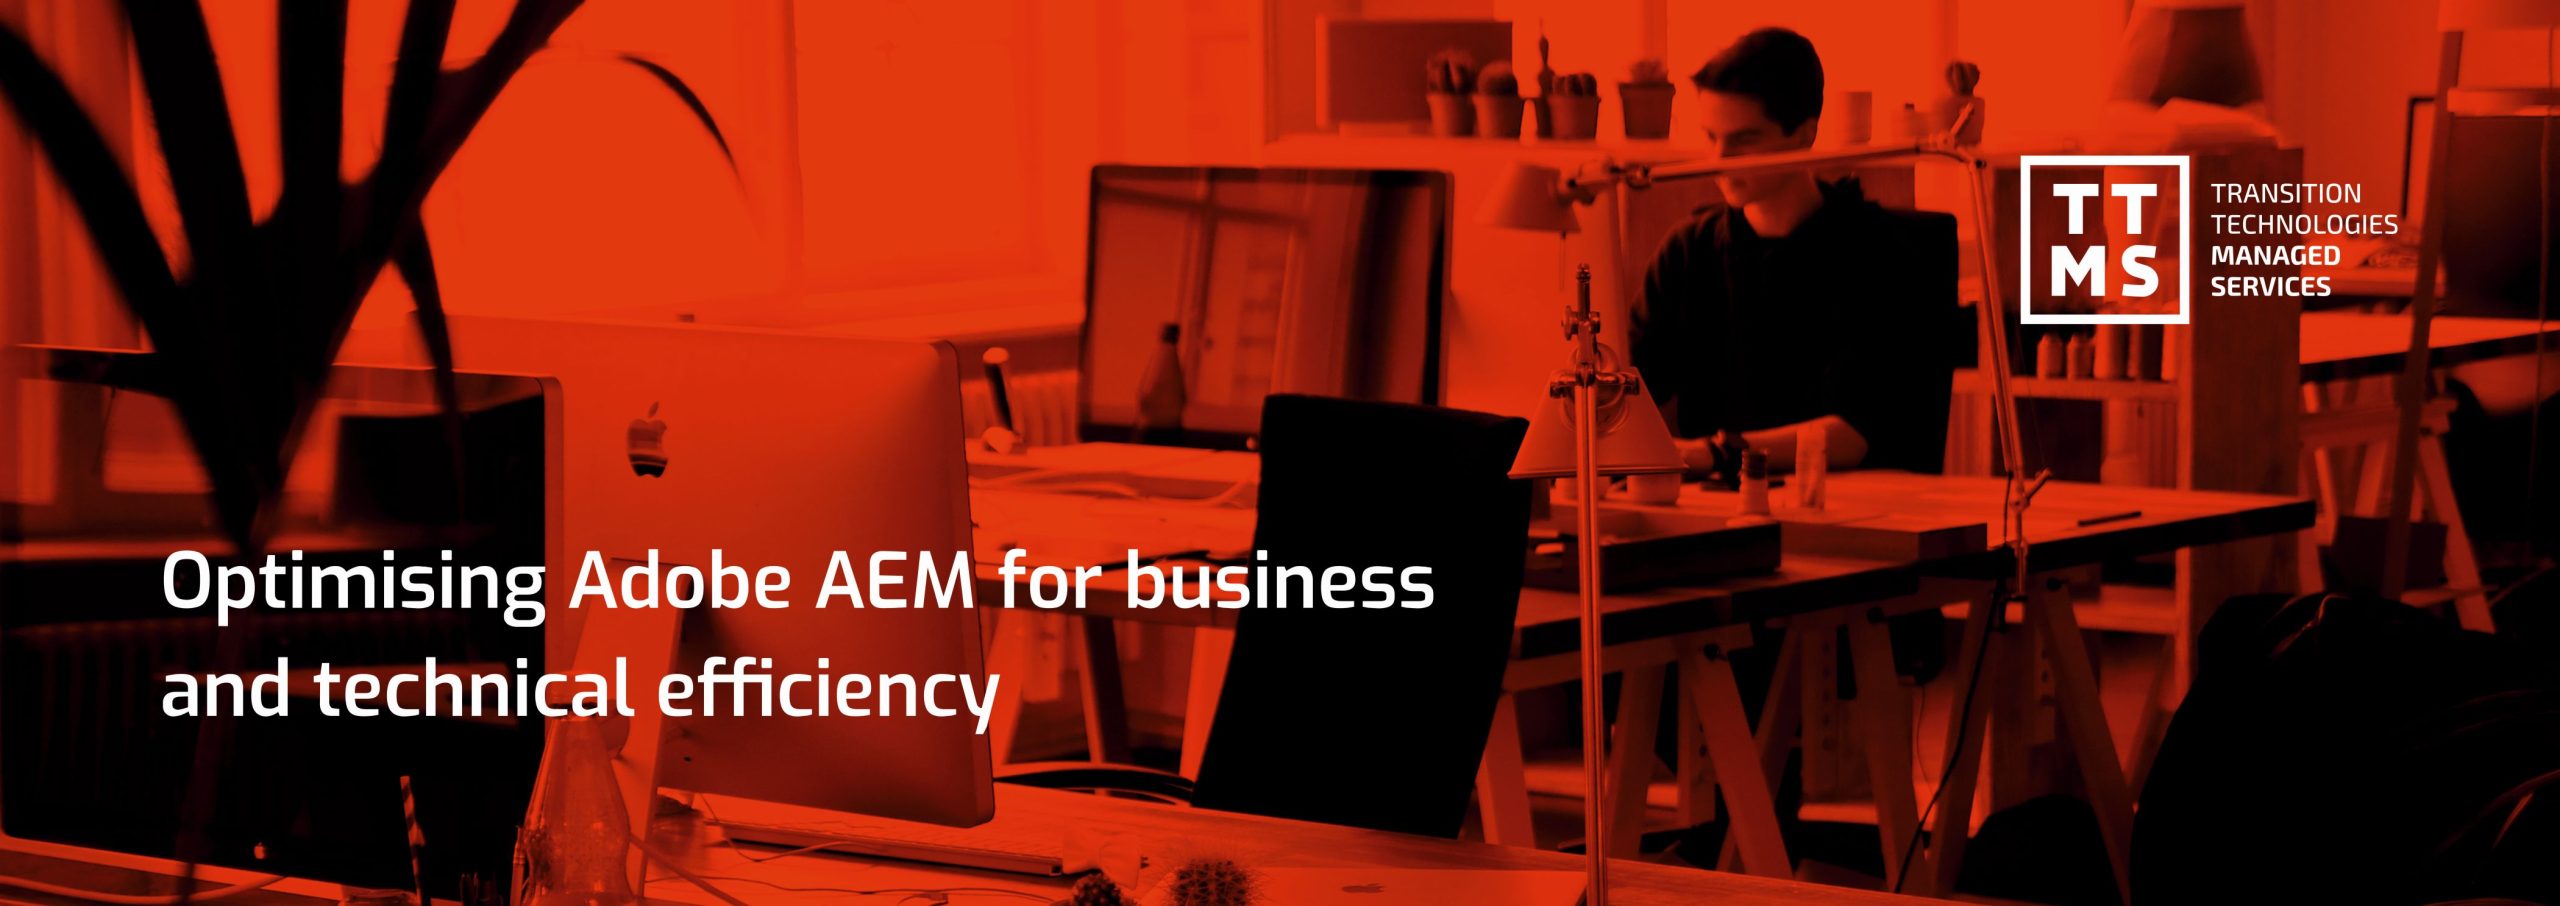 Optimising Adobe AEM for business and technical efficiency